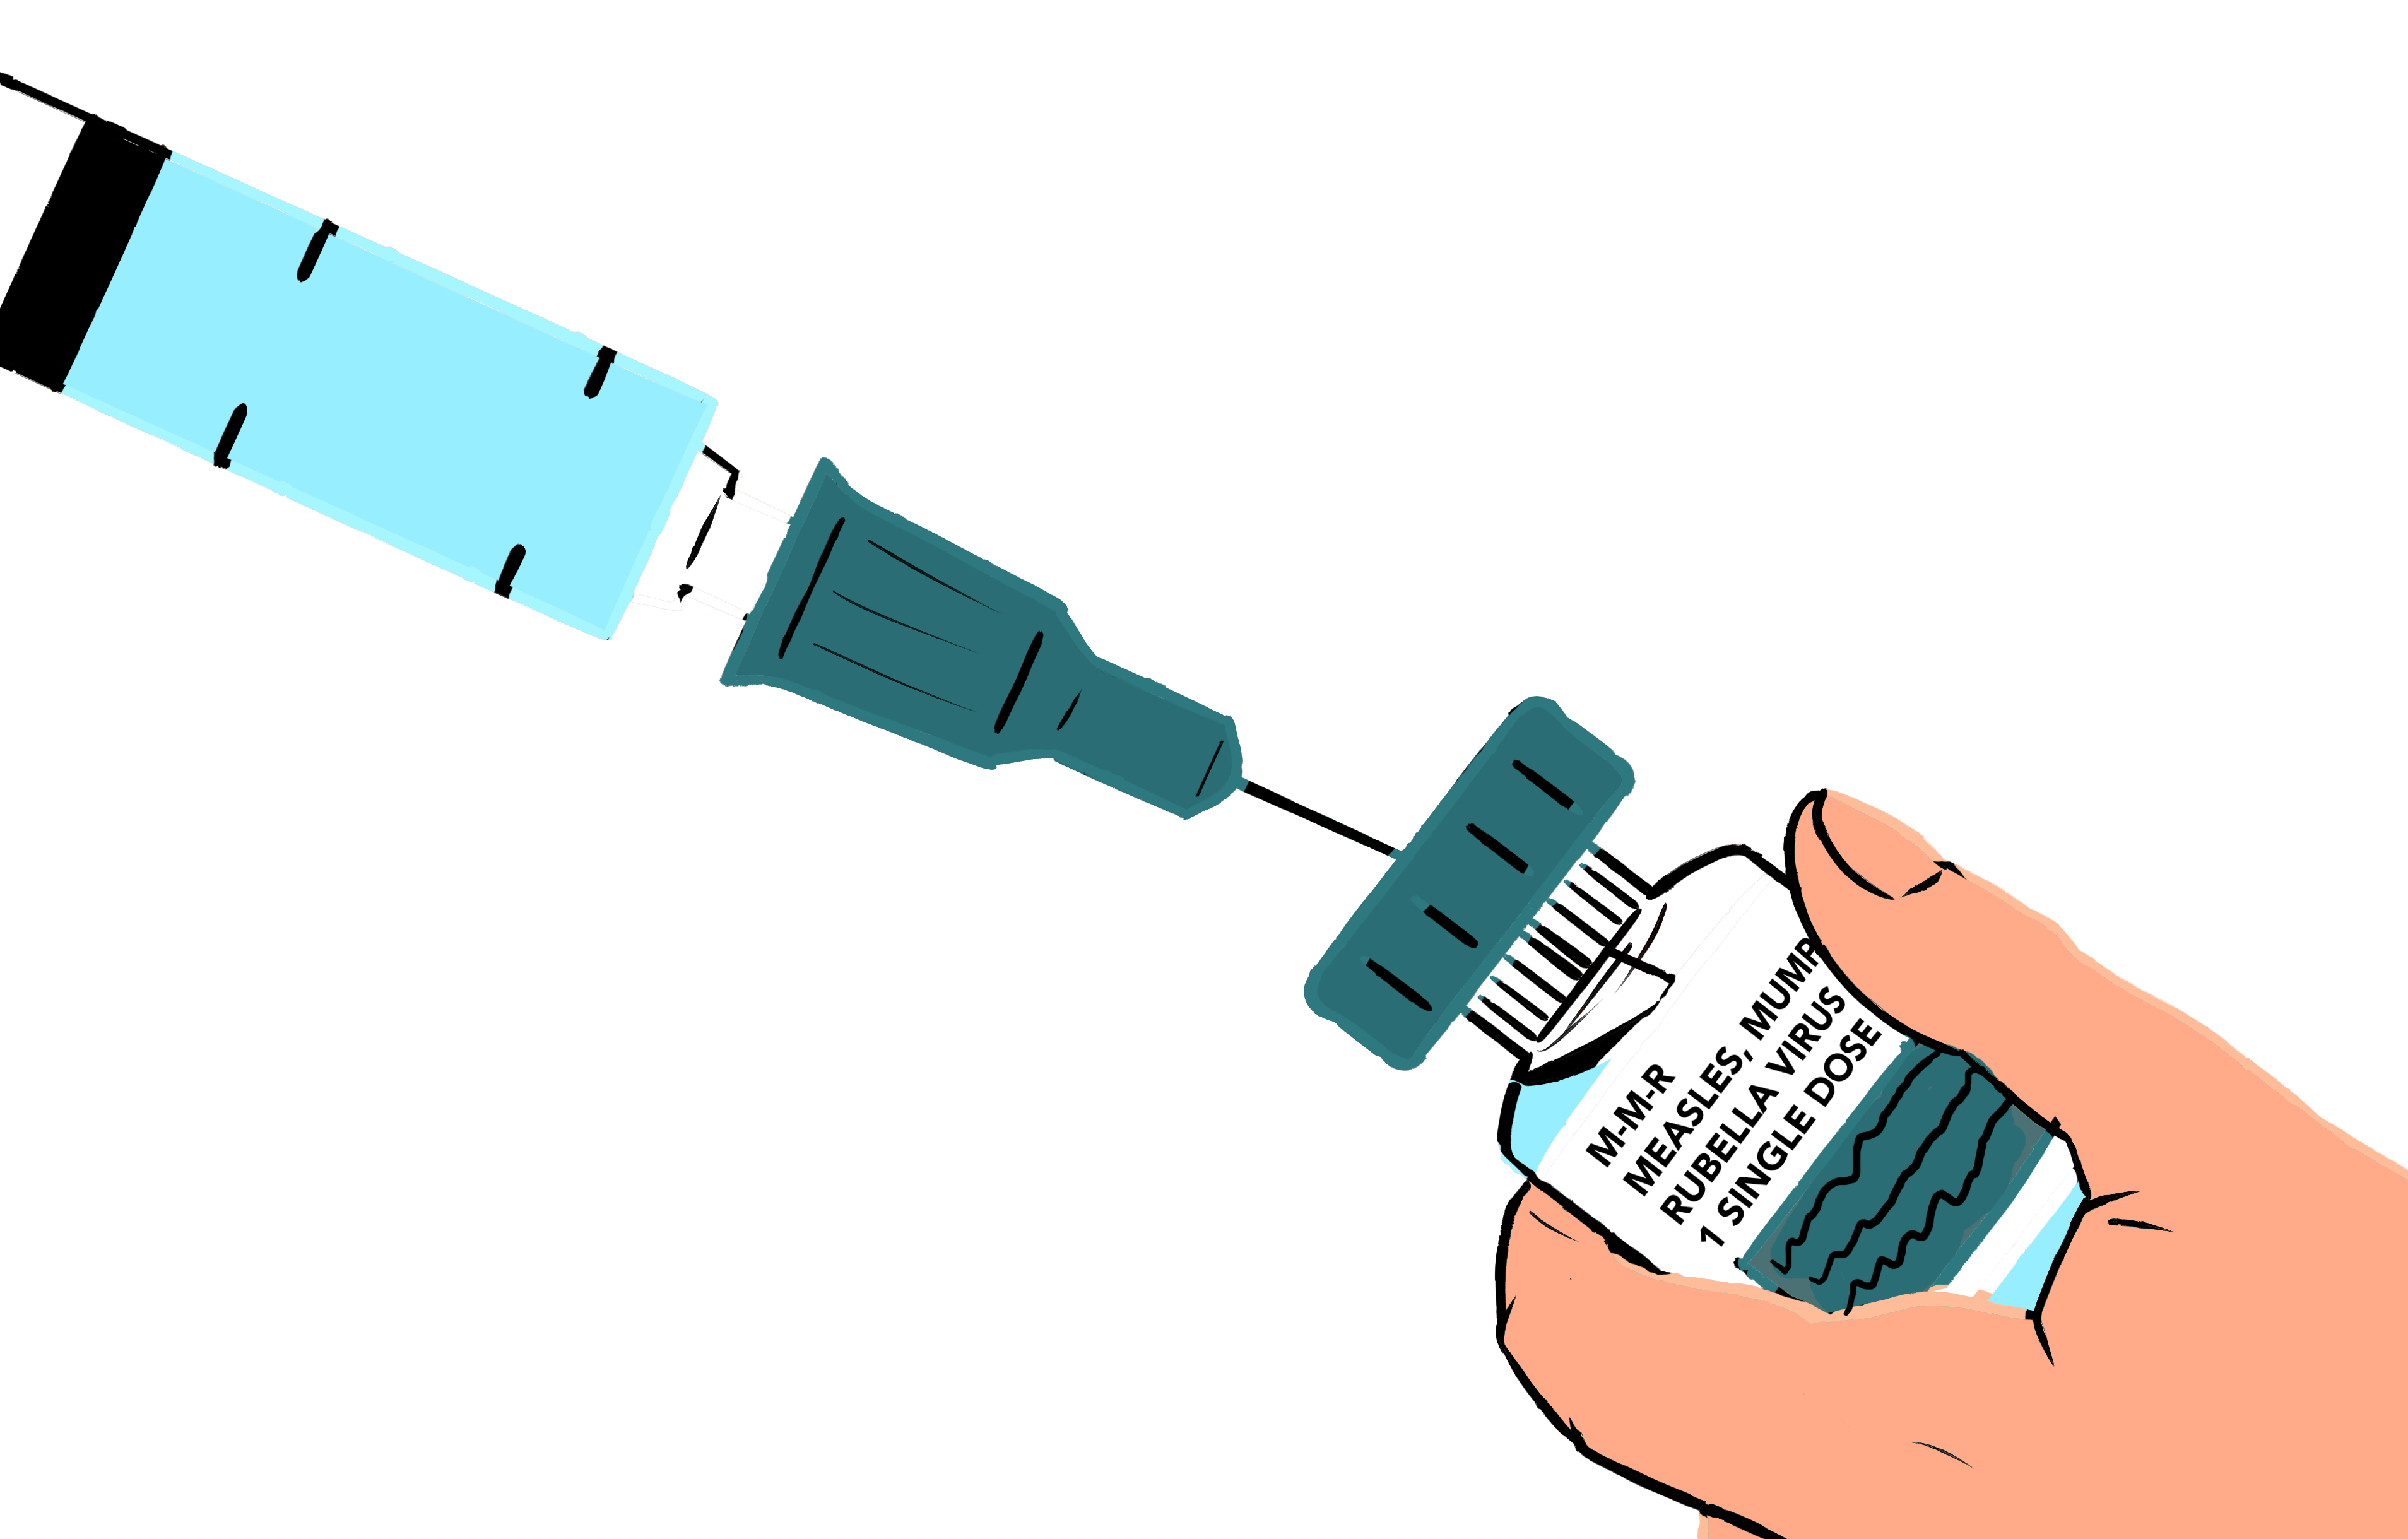 Anti-vaxxers and measles outbreaks